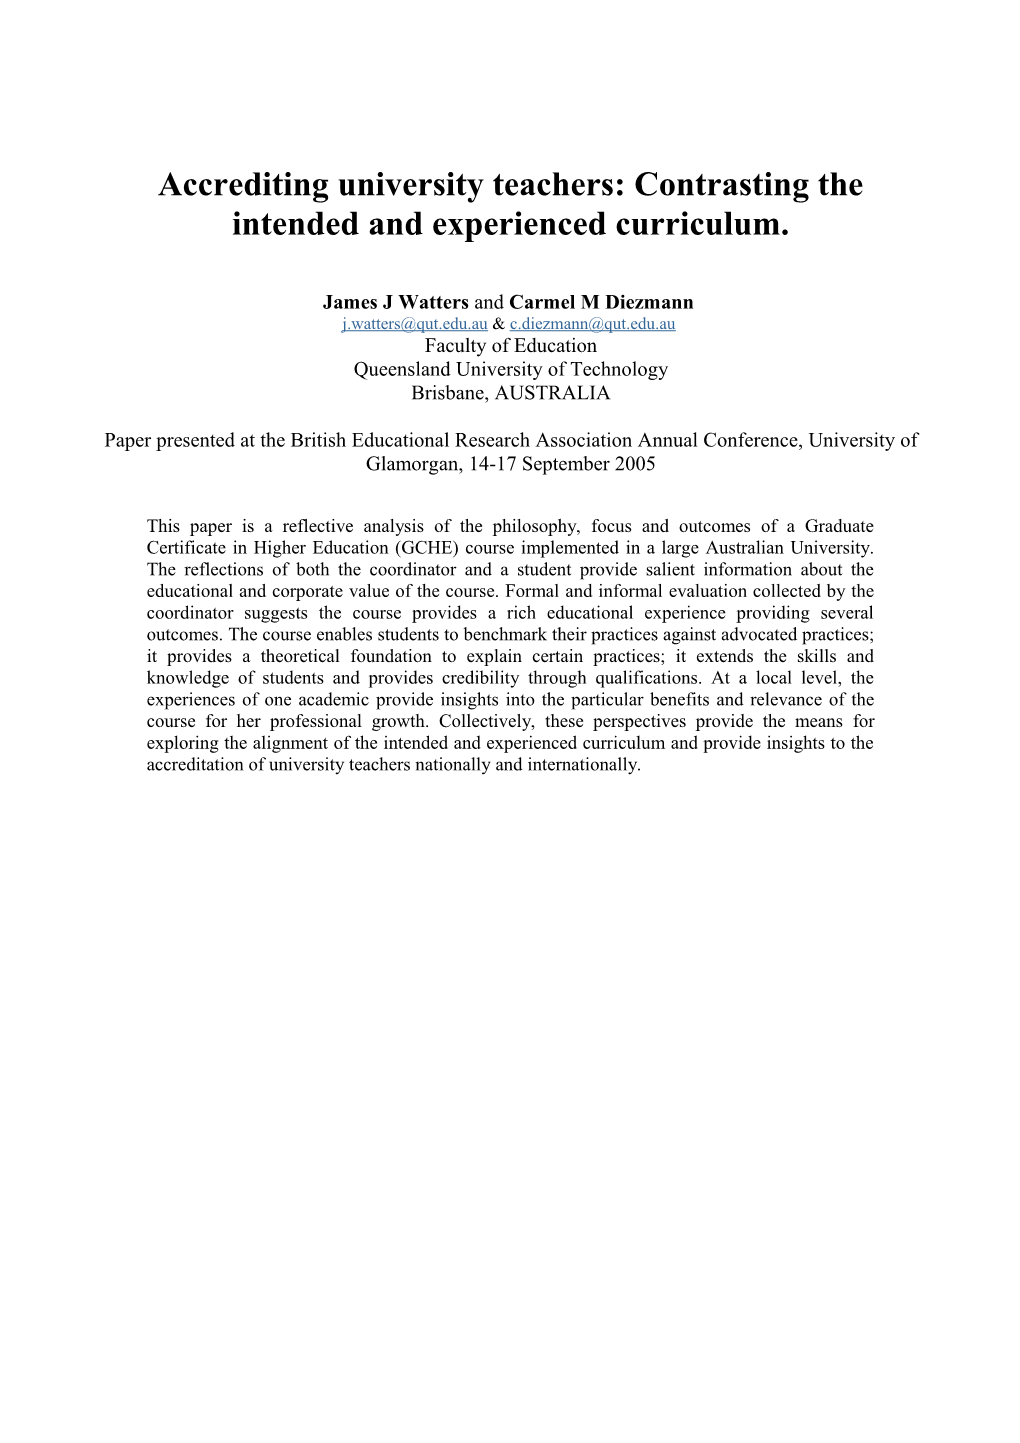 Accrediting University Teachers: Contrasting the Intended and Experienced Curriculum